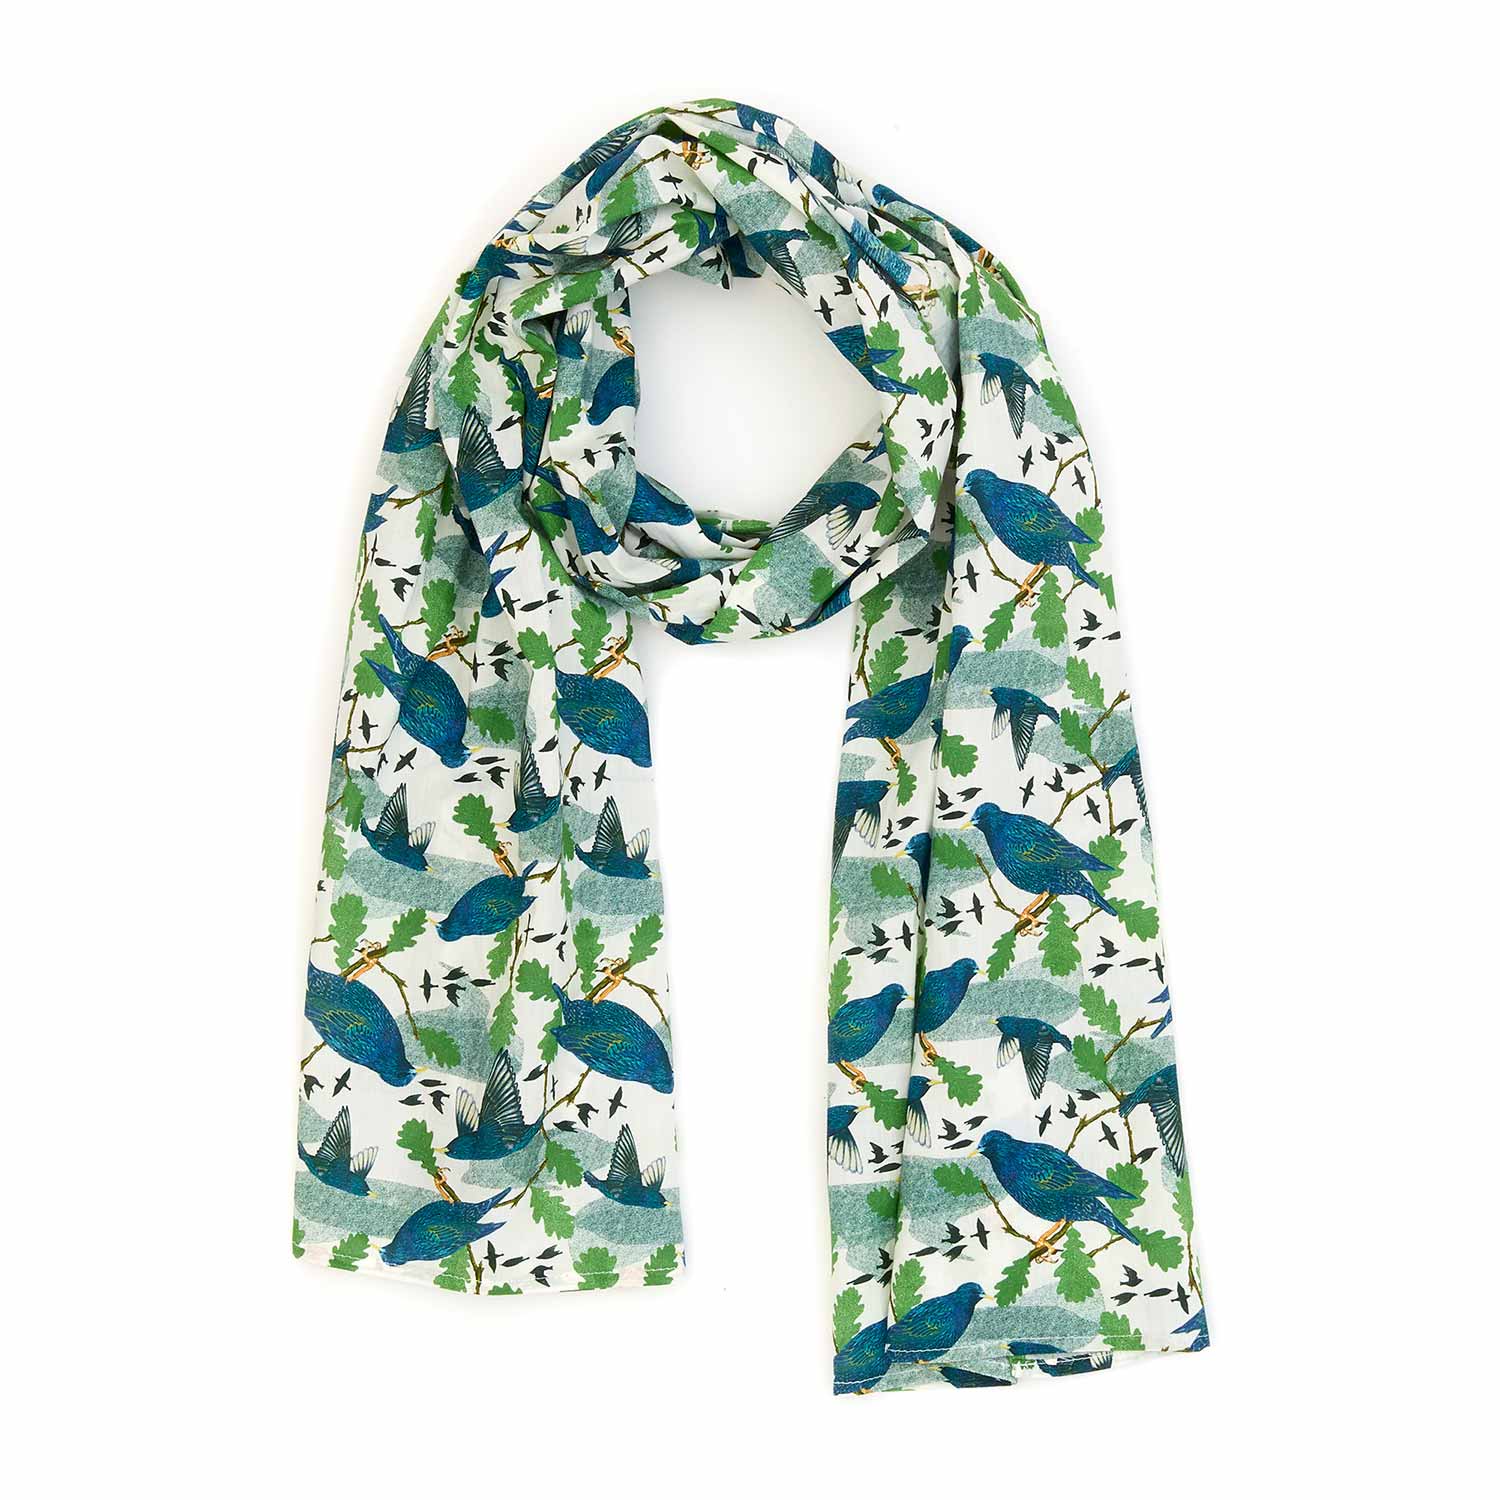 Wild Isles Collection - RSPB Shop